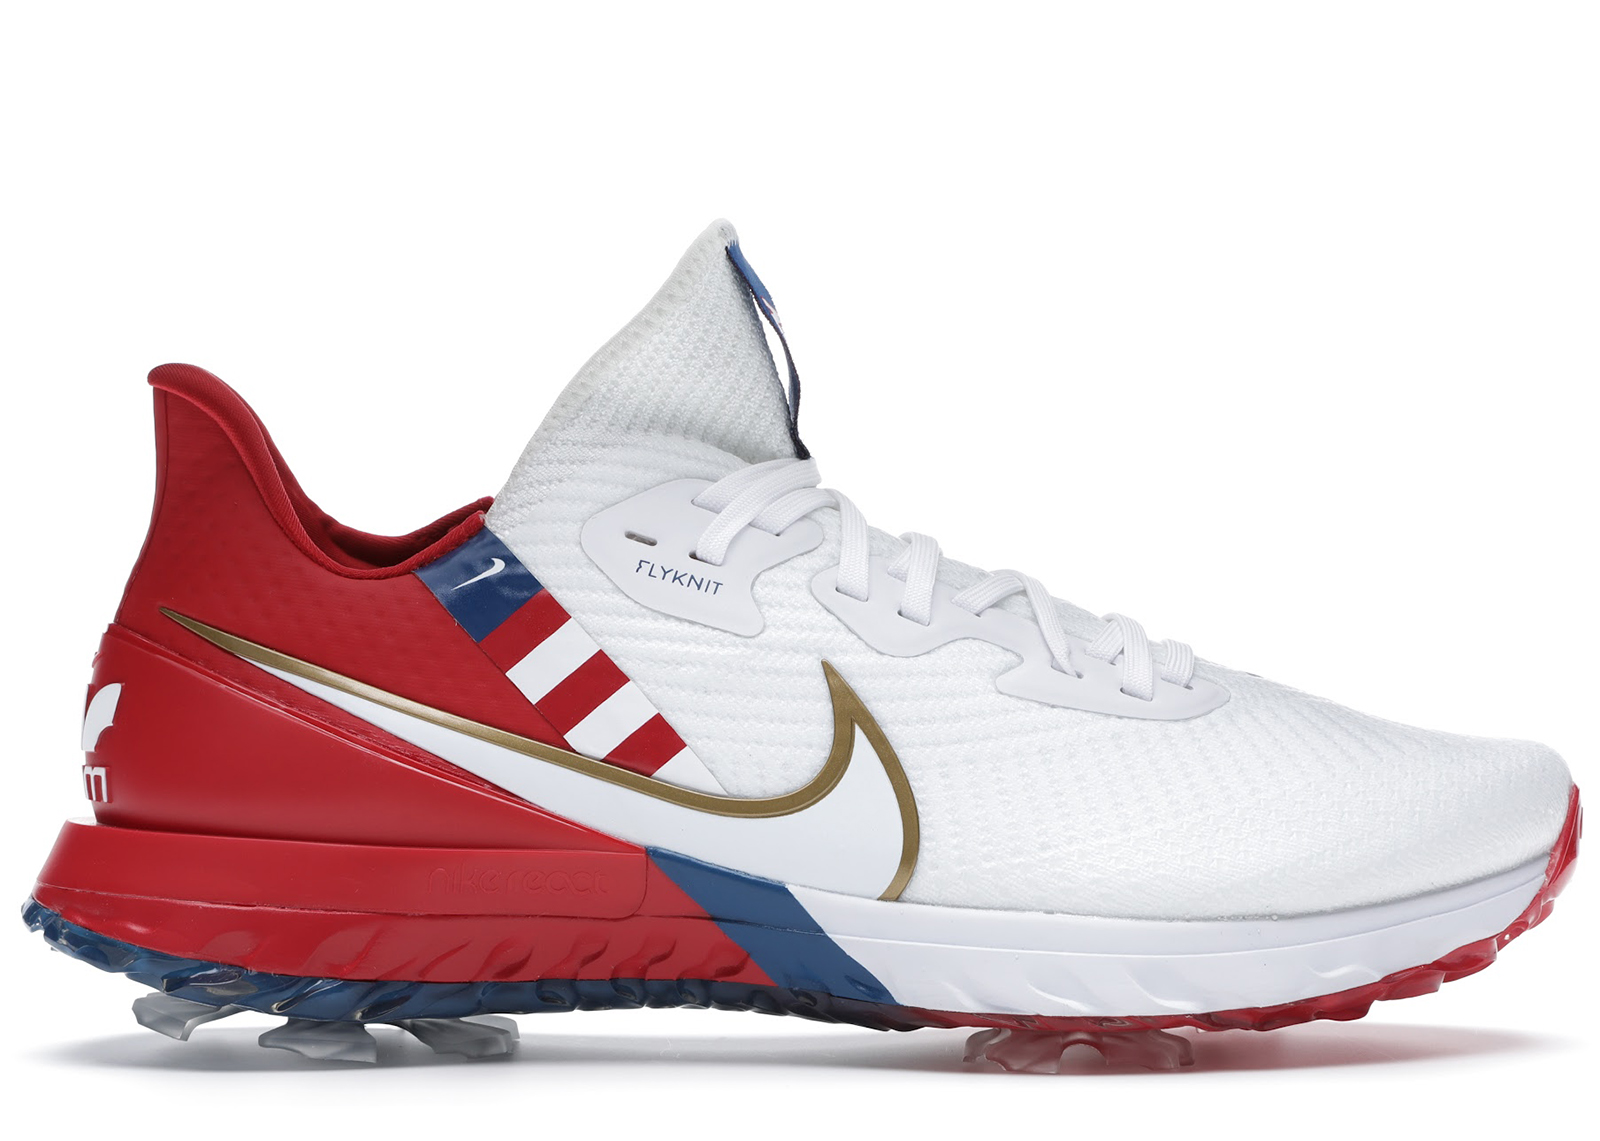 Nike Air Zoom Infinity Tour NRG Golf Ryder Cup USA Men's - CT0601 